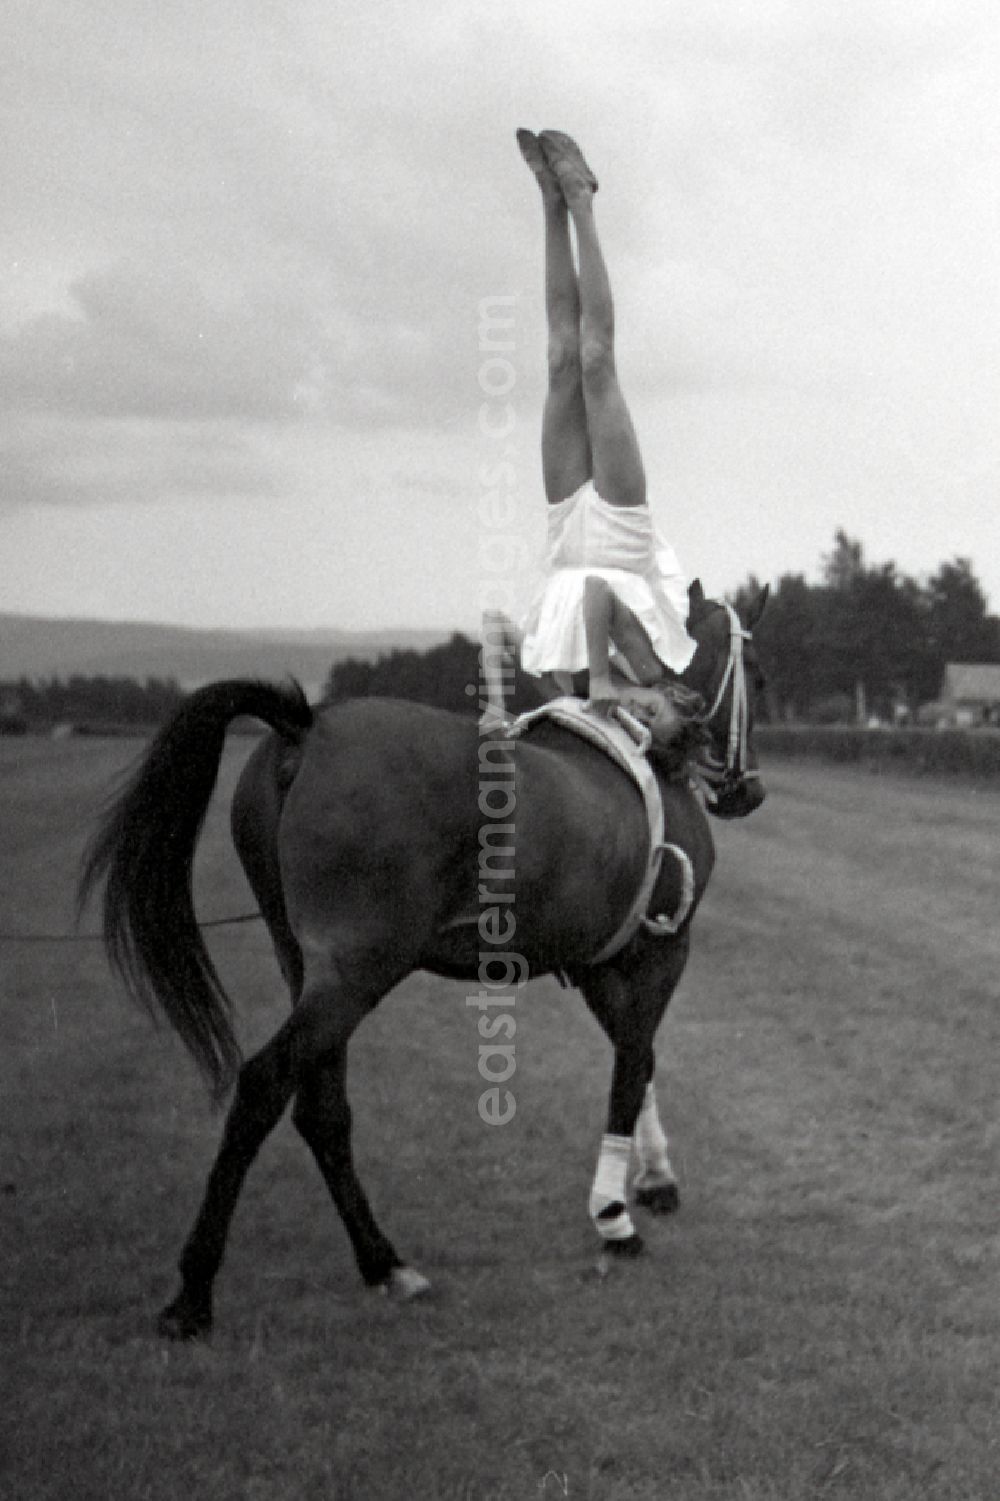 GDR photo archive: Gotha - Show program on the track: children's vaulting group Gotha in Gotha in the state Thuringia on the territory of the former GDR, German Democratic Republic